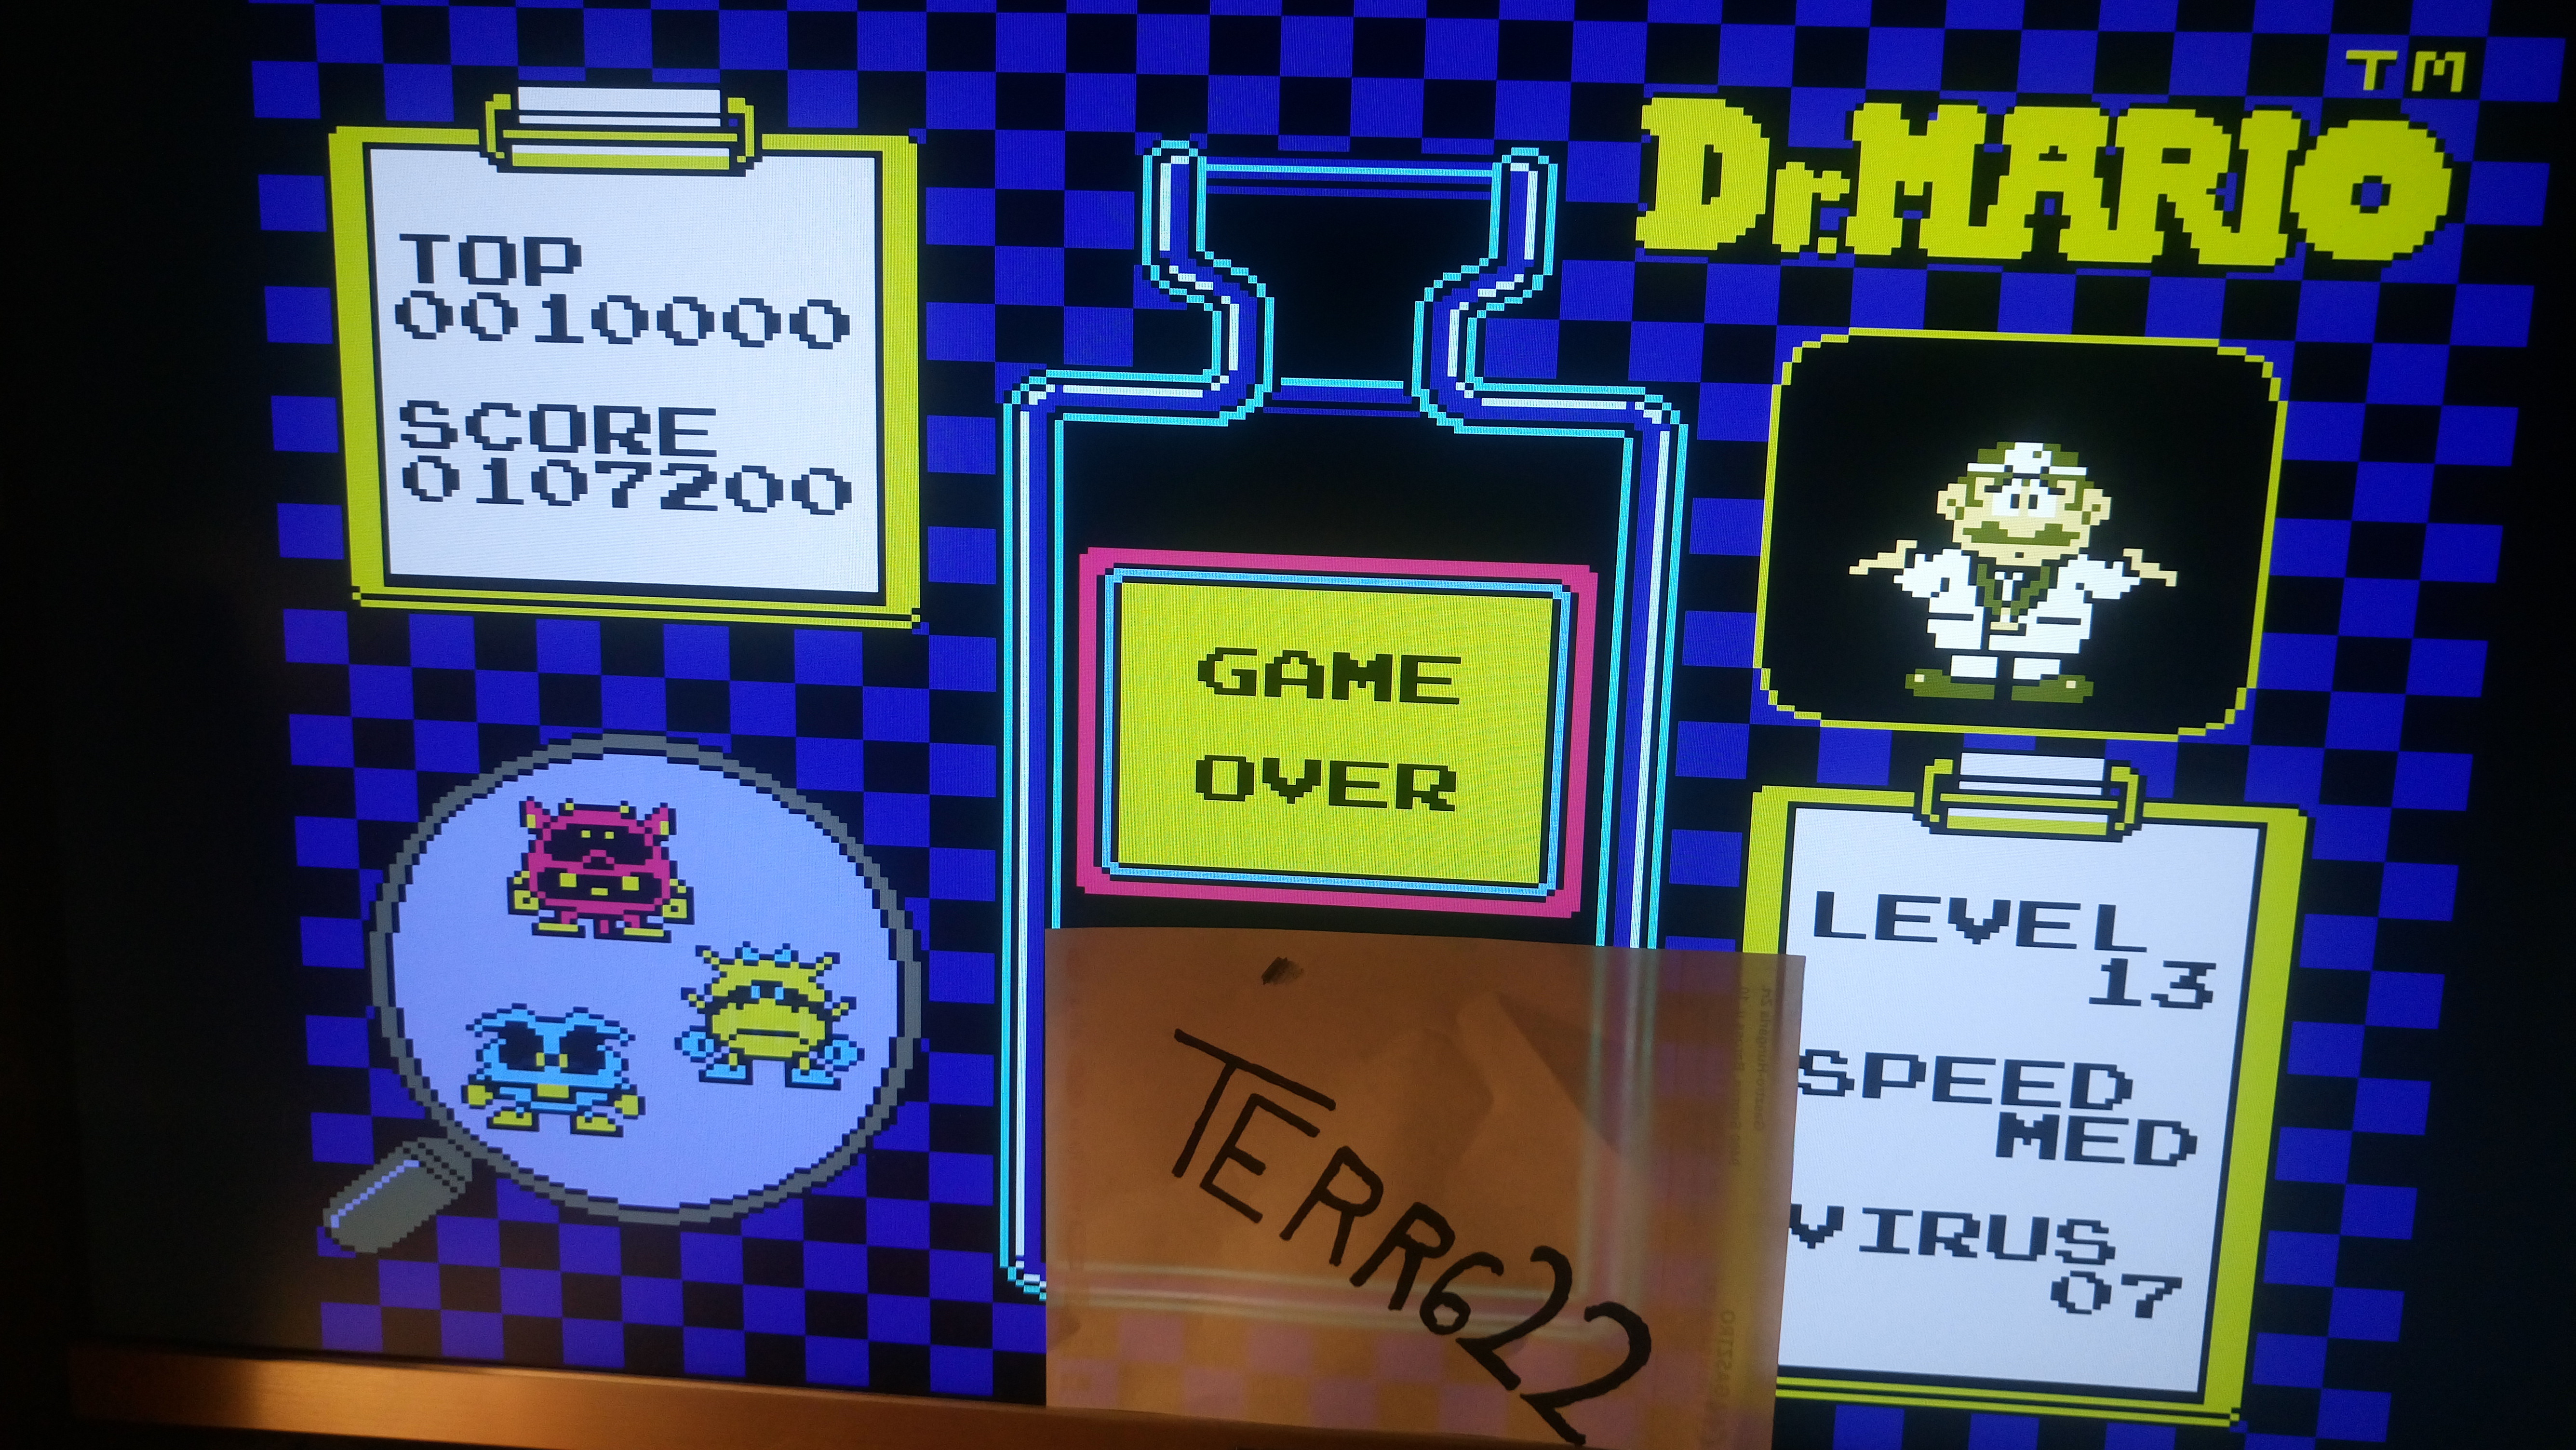 Dr. Mario 107,200 points